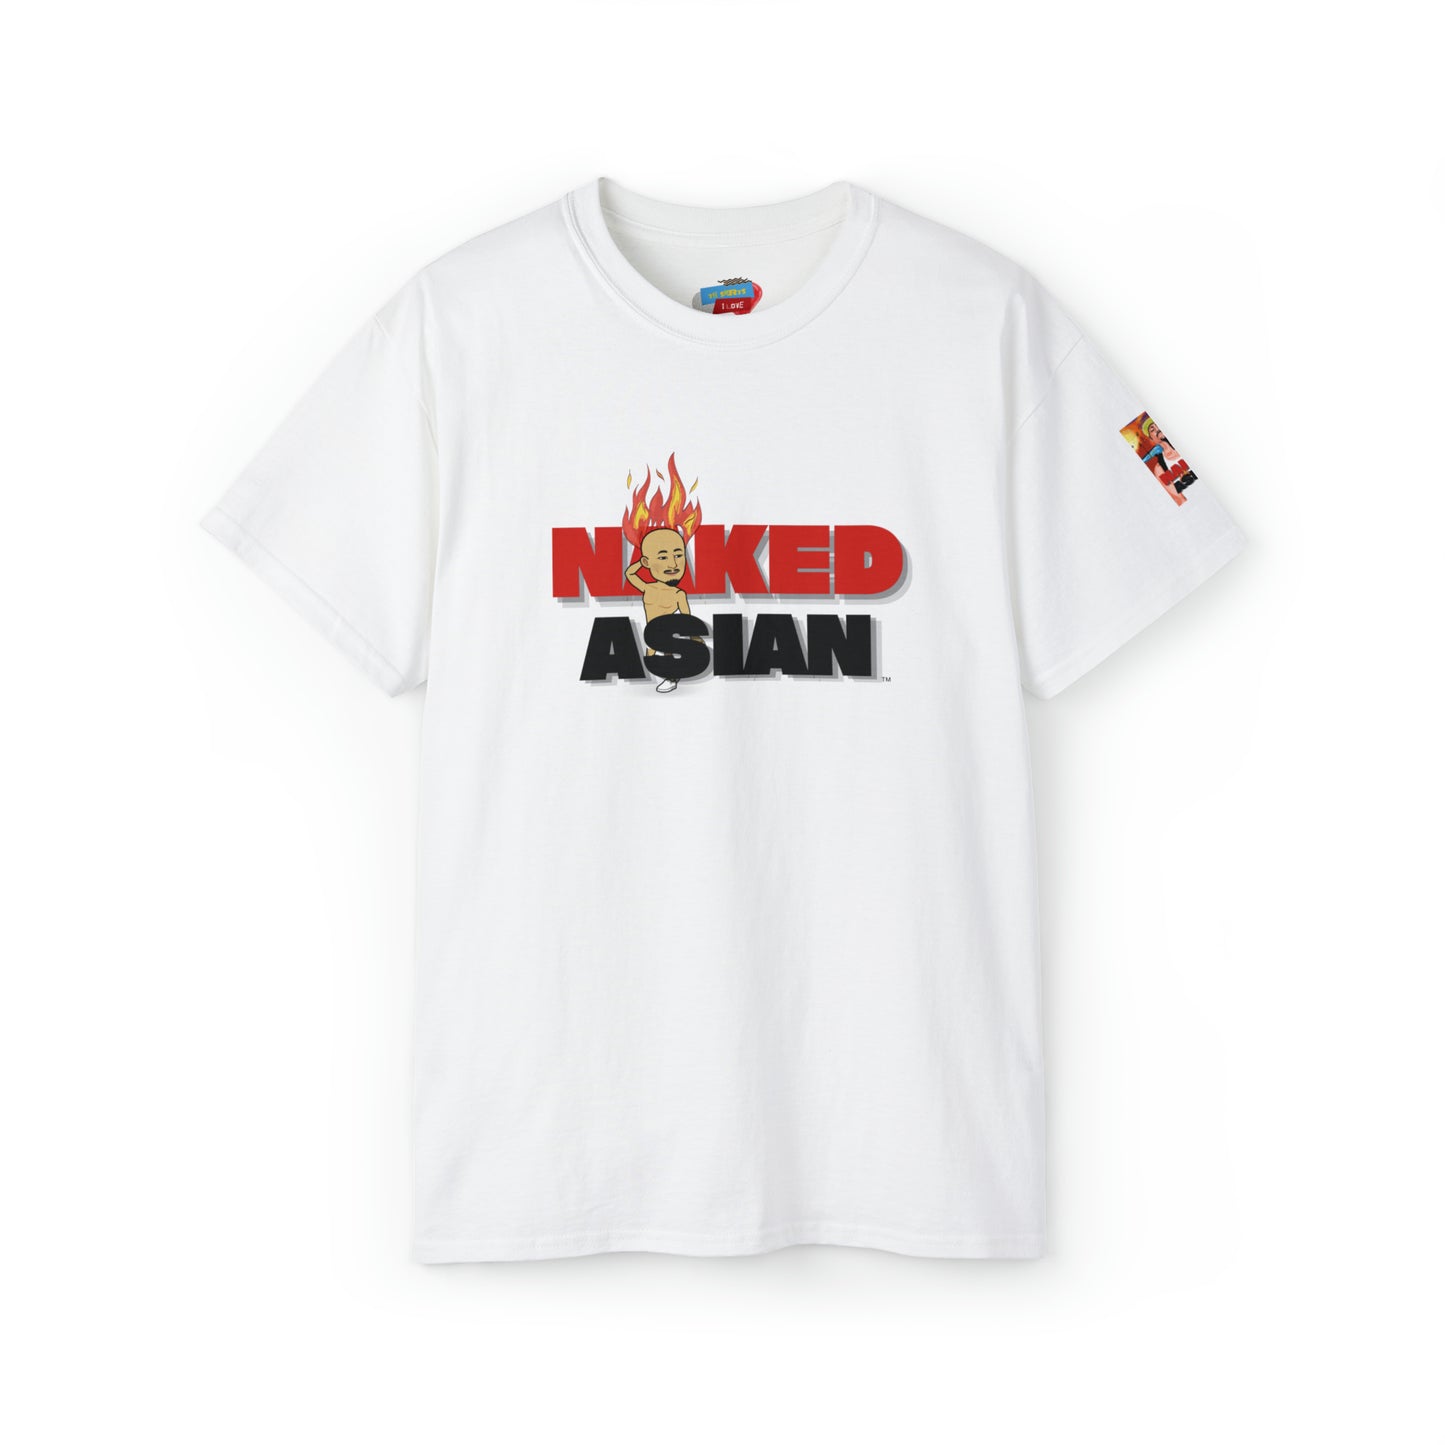 Naked Asian Posing Fire Cotton Tee